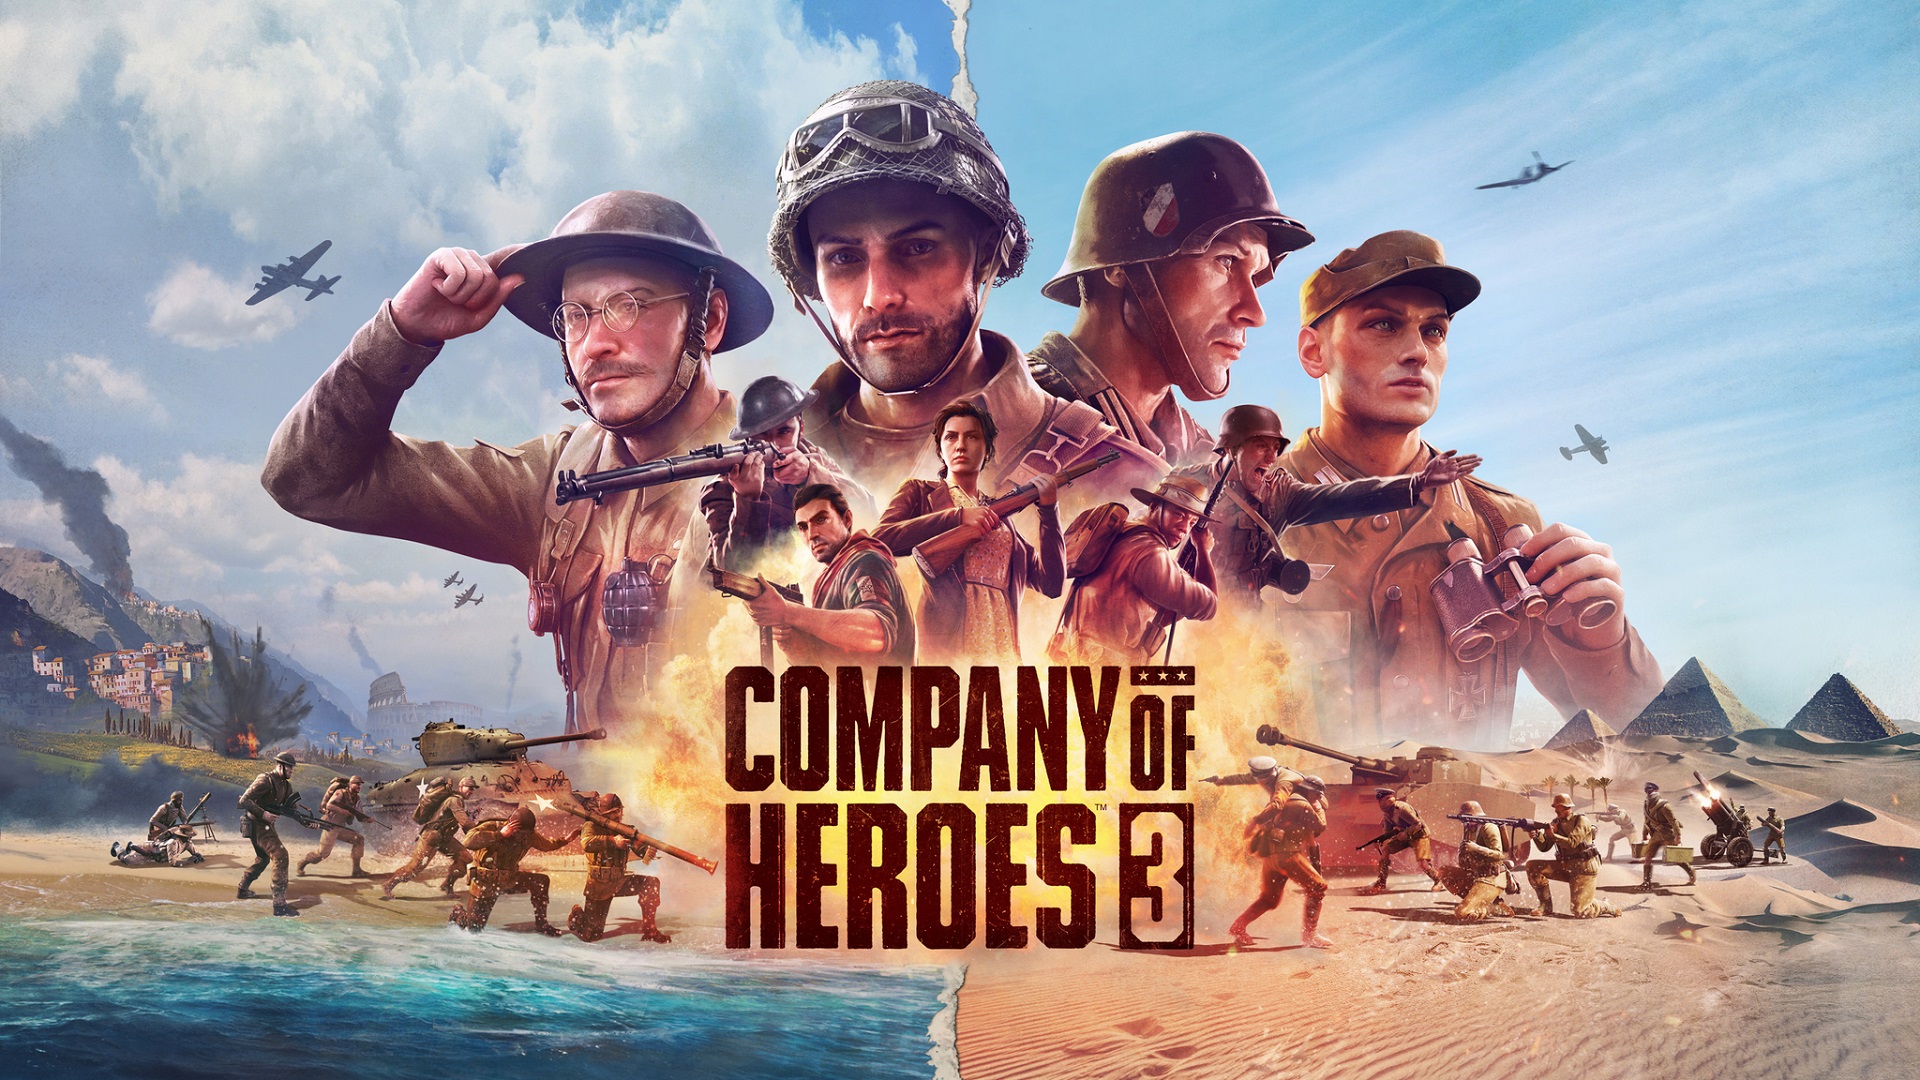 Company of Heroes 3 Announced for PC